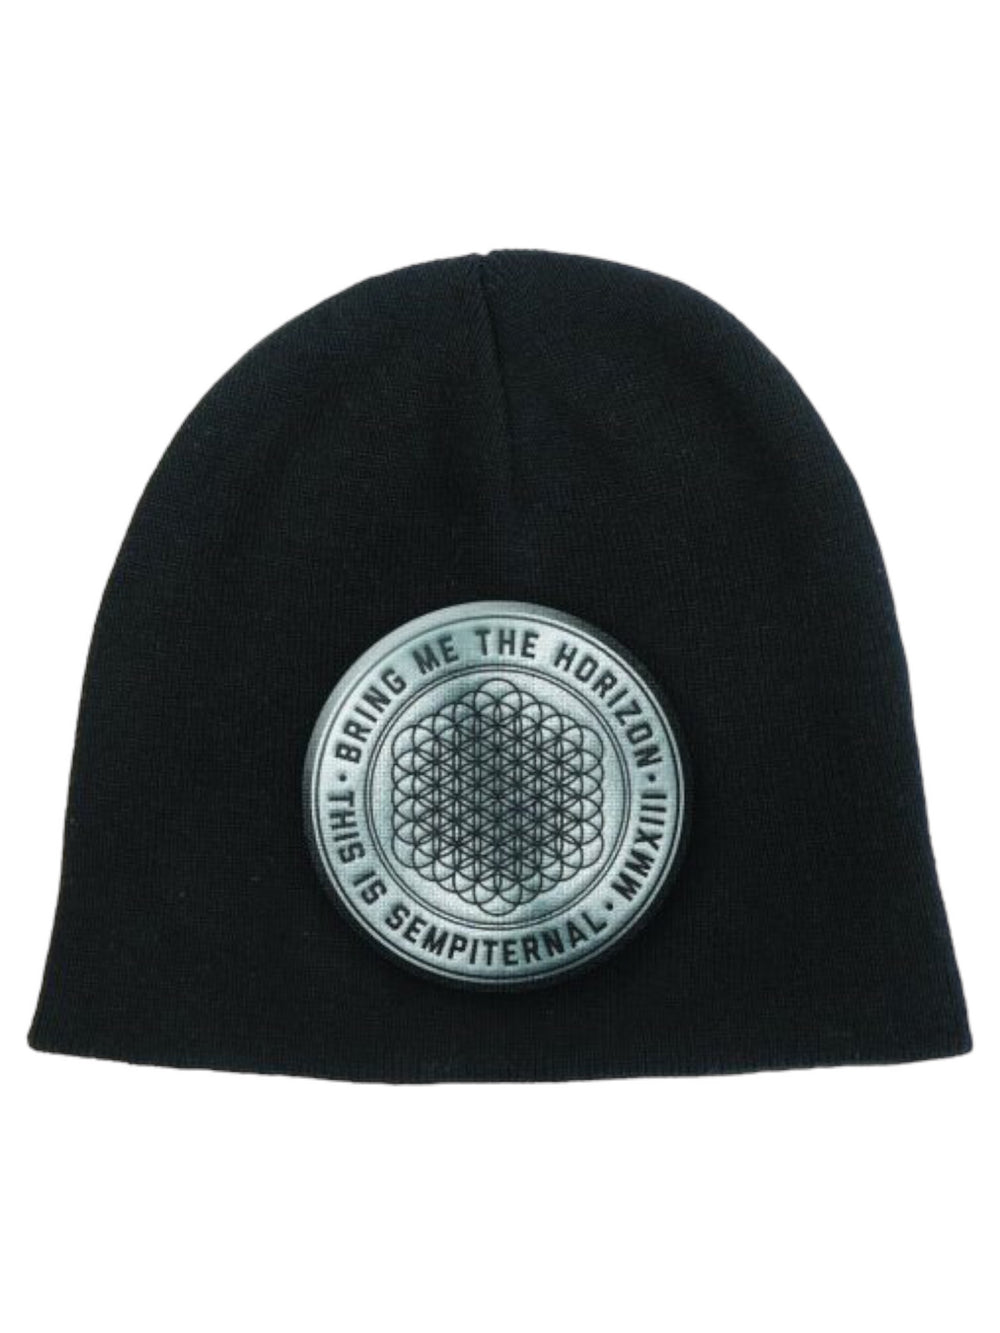 Bring Me The Horizon - Sempiternal Official Beanie Hat One Size Fits All NEW